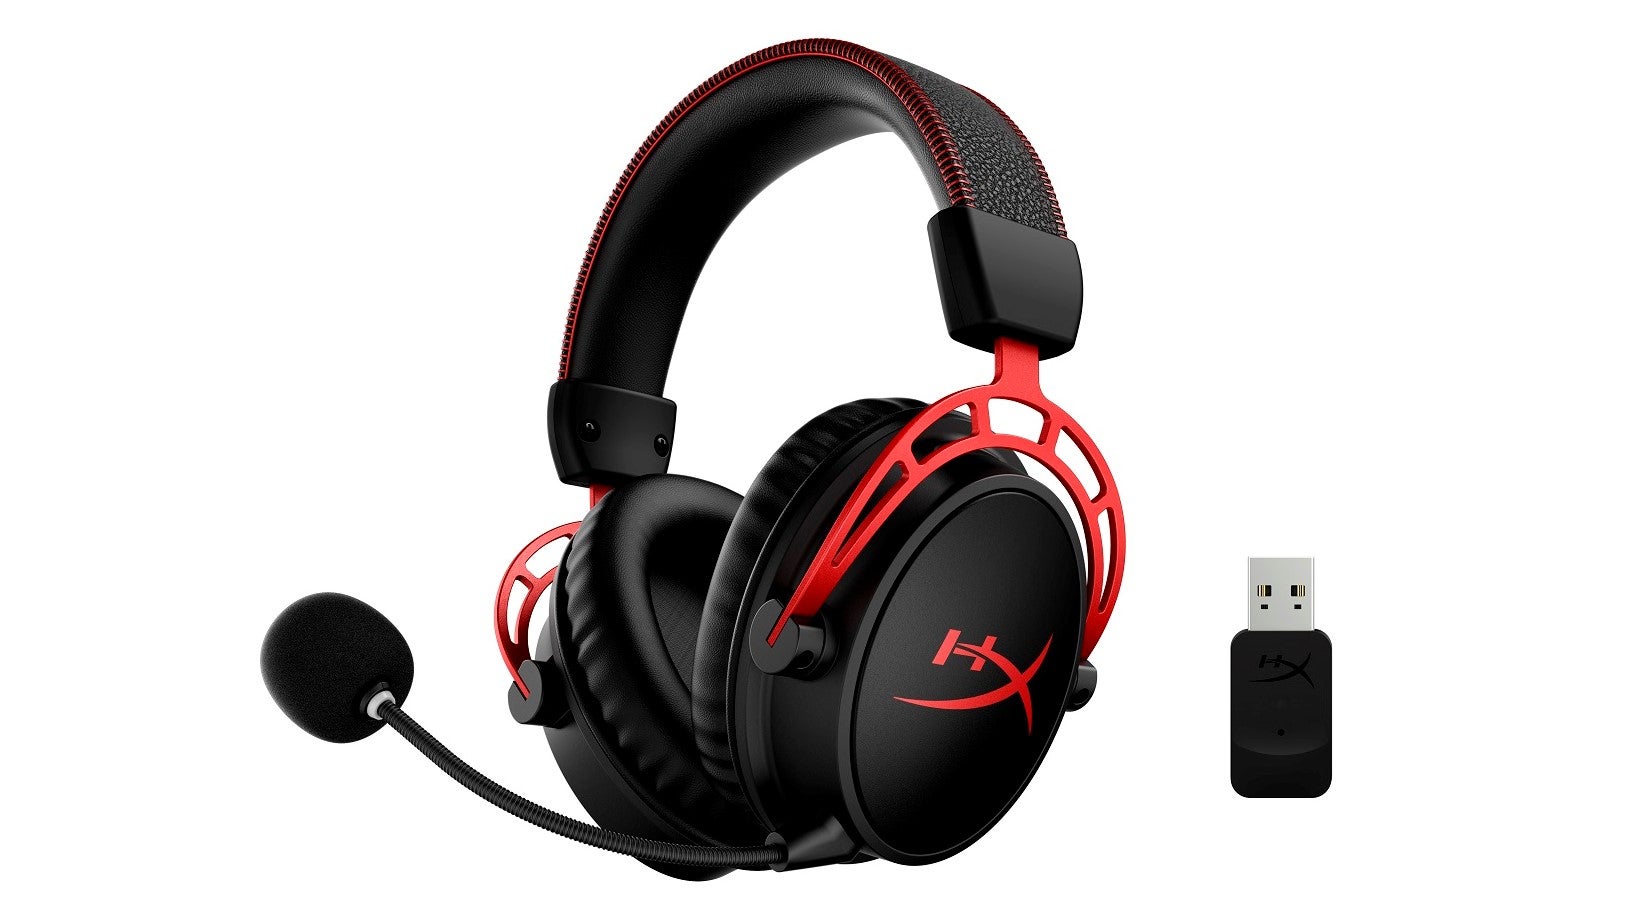 HyperX Cloud Alpha Wireless gaming headset against a white background.